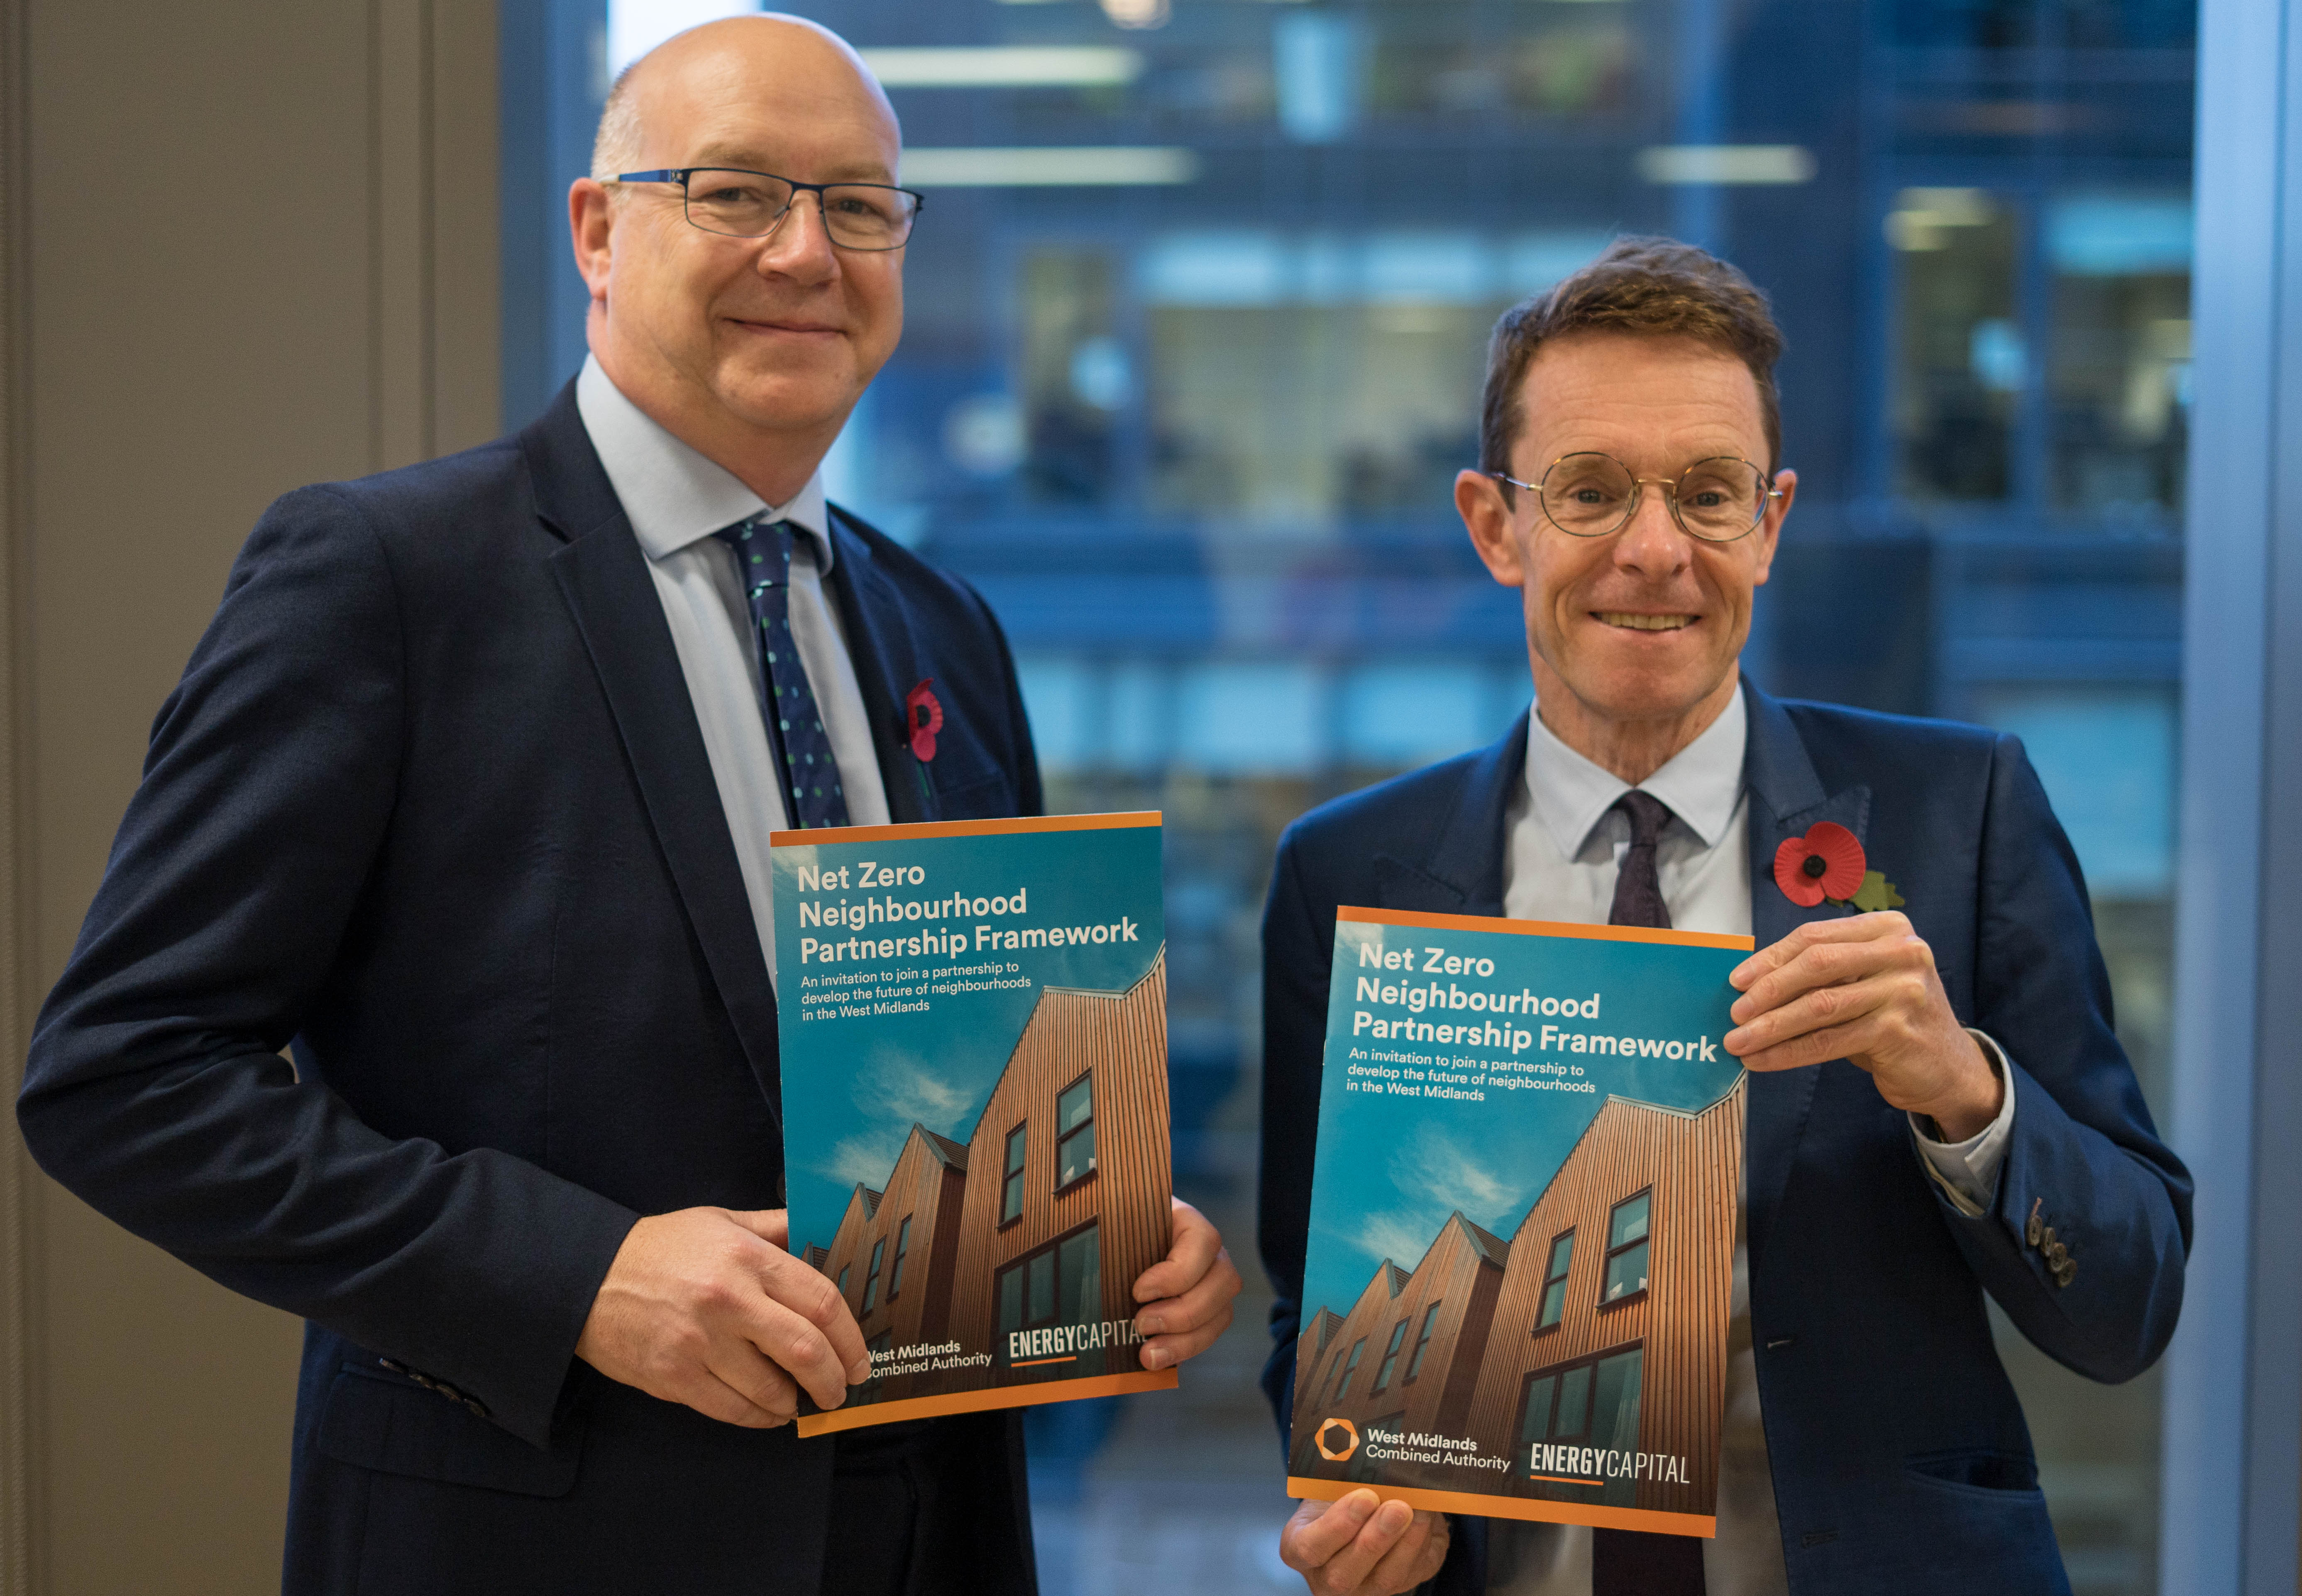 Jerome Frost, chair at Arup, UK, India, Middle East and Africa (left) and Andy Street, Mayor of the West Midlands, announce the UK's first Net Zero Neighbourhood pilot programme